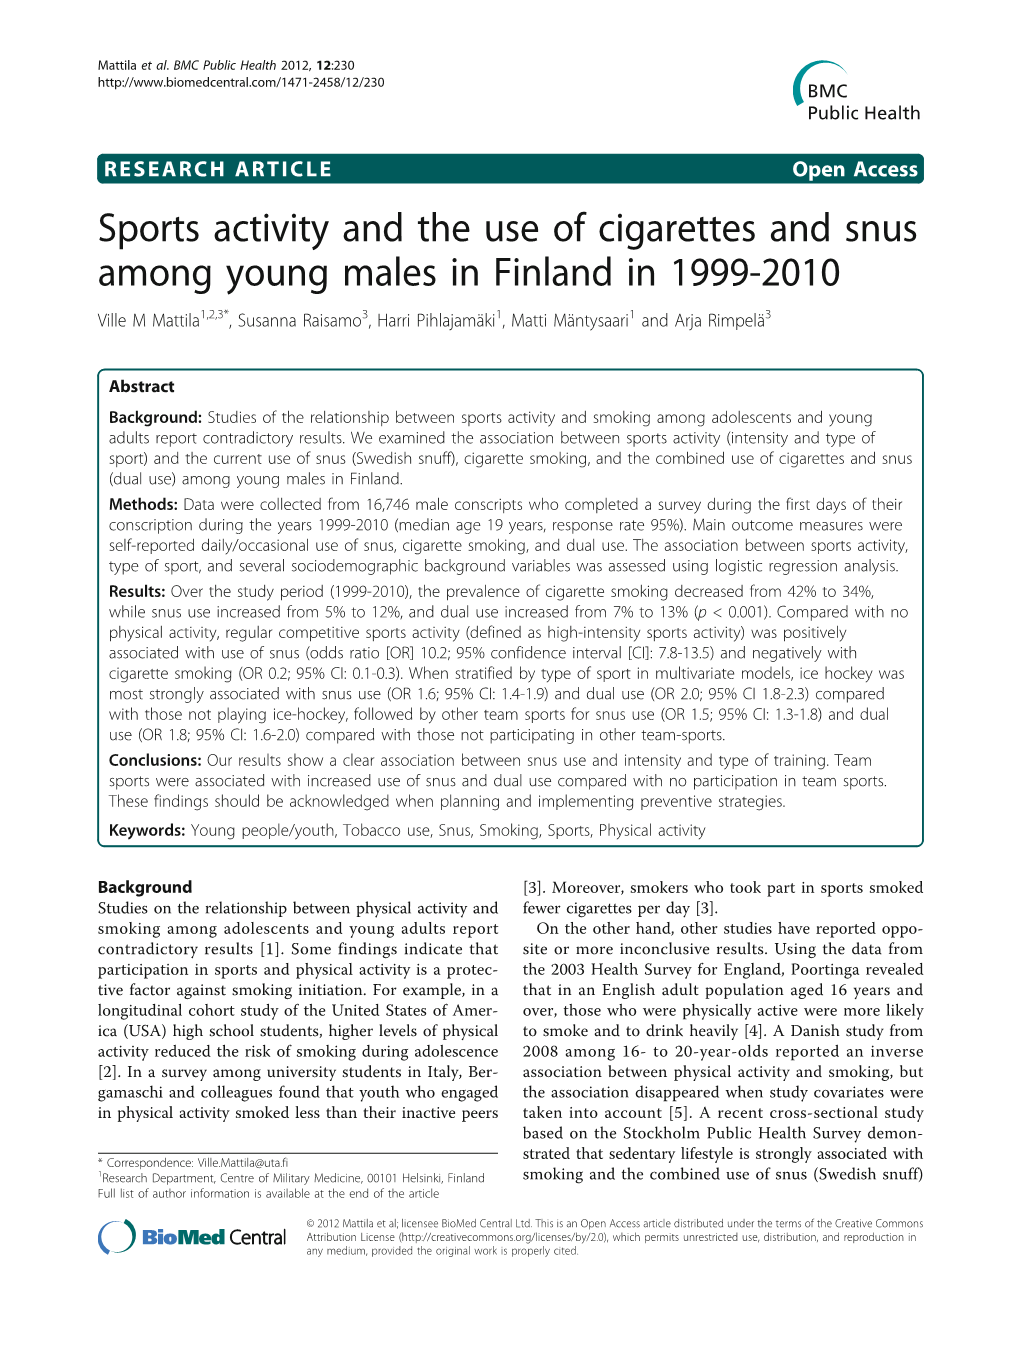 Sports Activity and the Use of Cigarettes and Snus Among Young